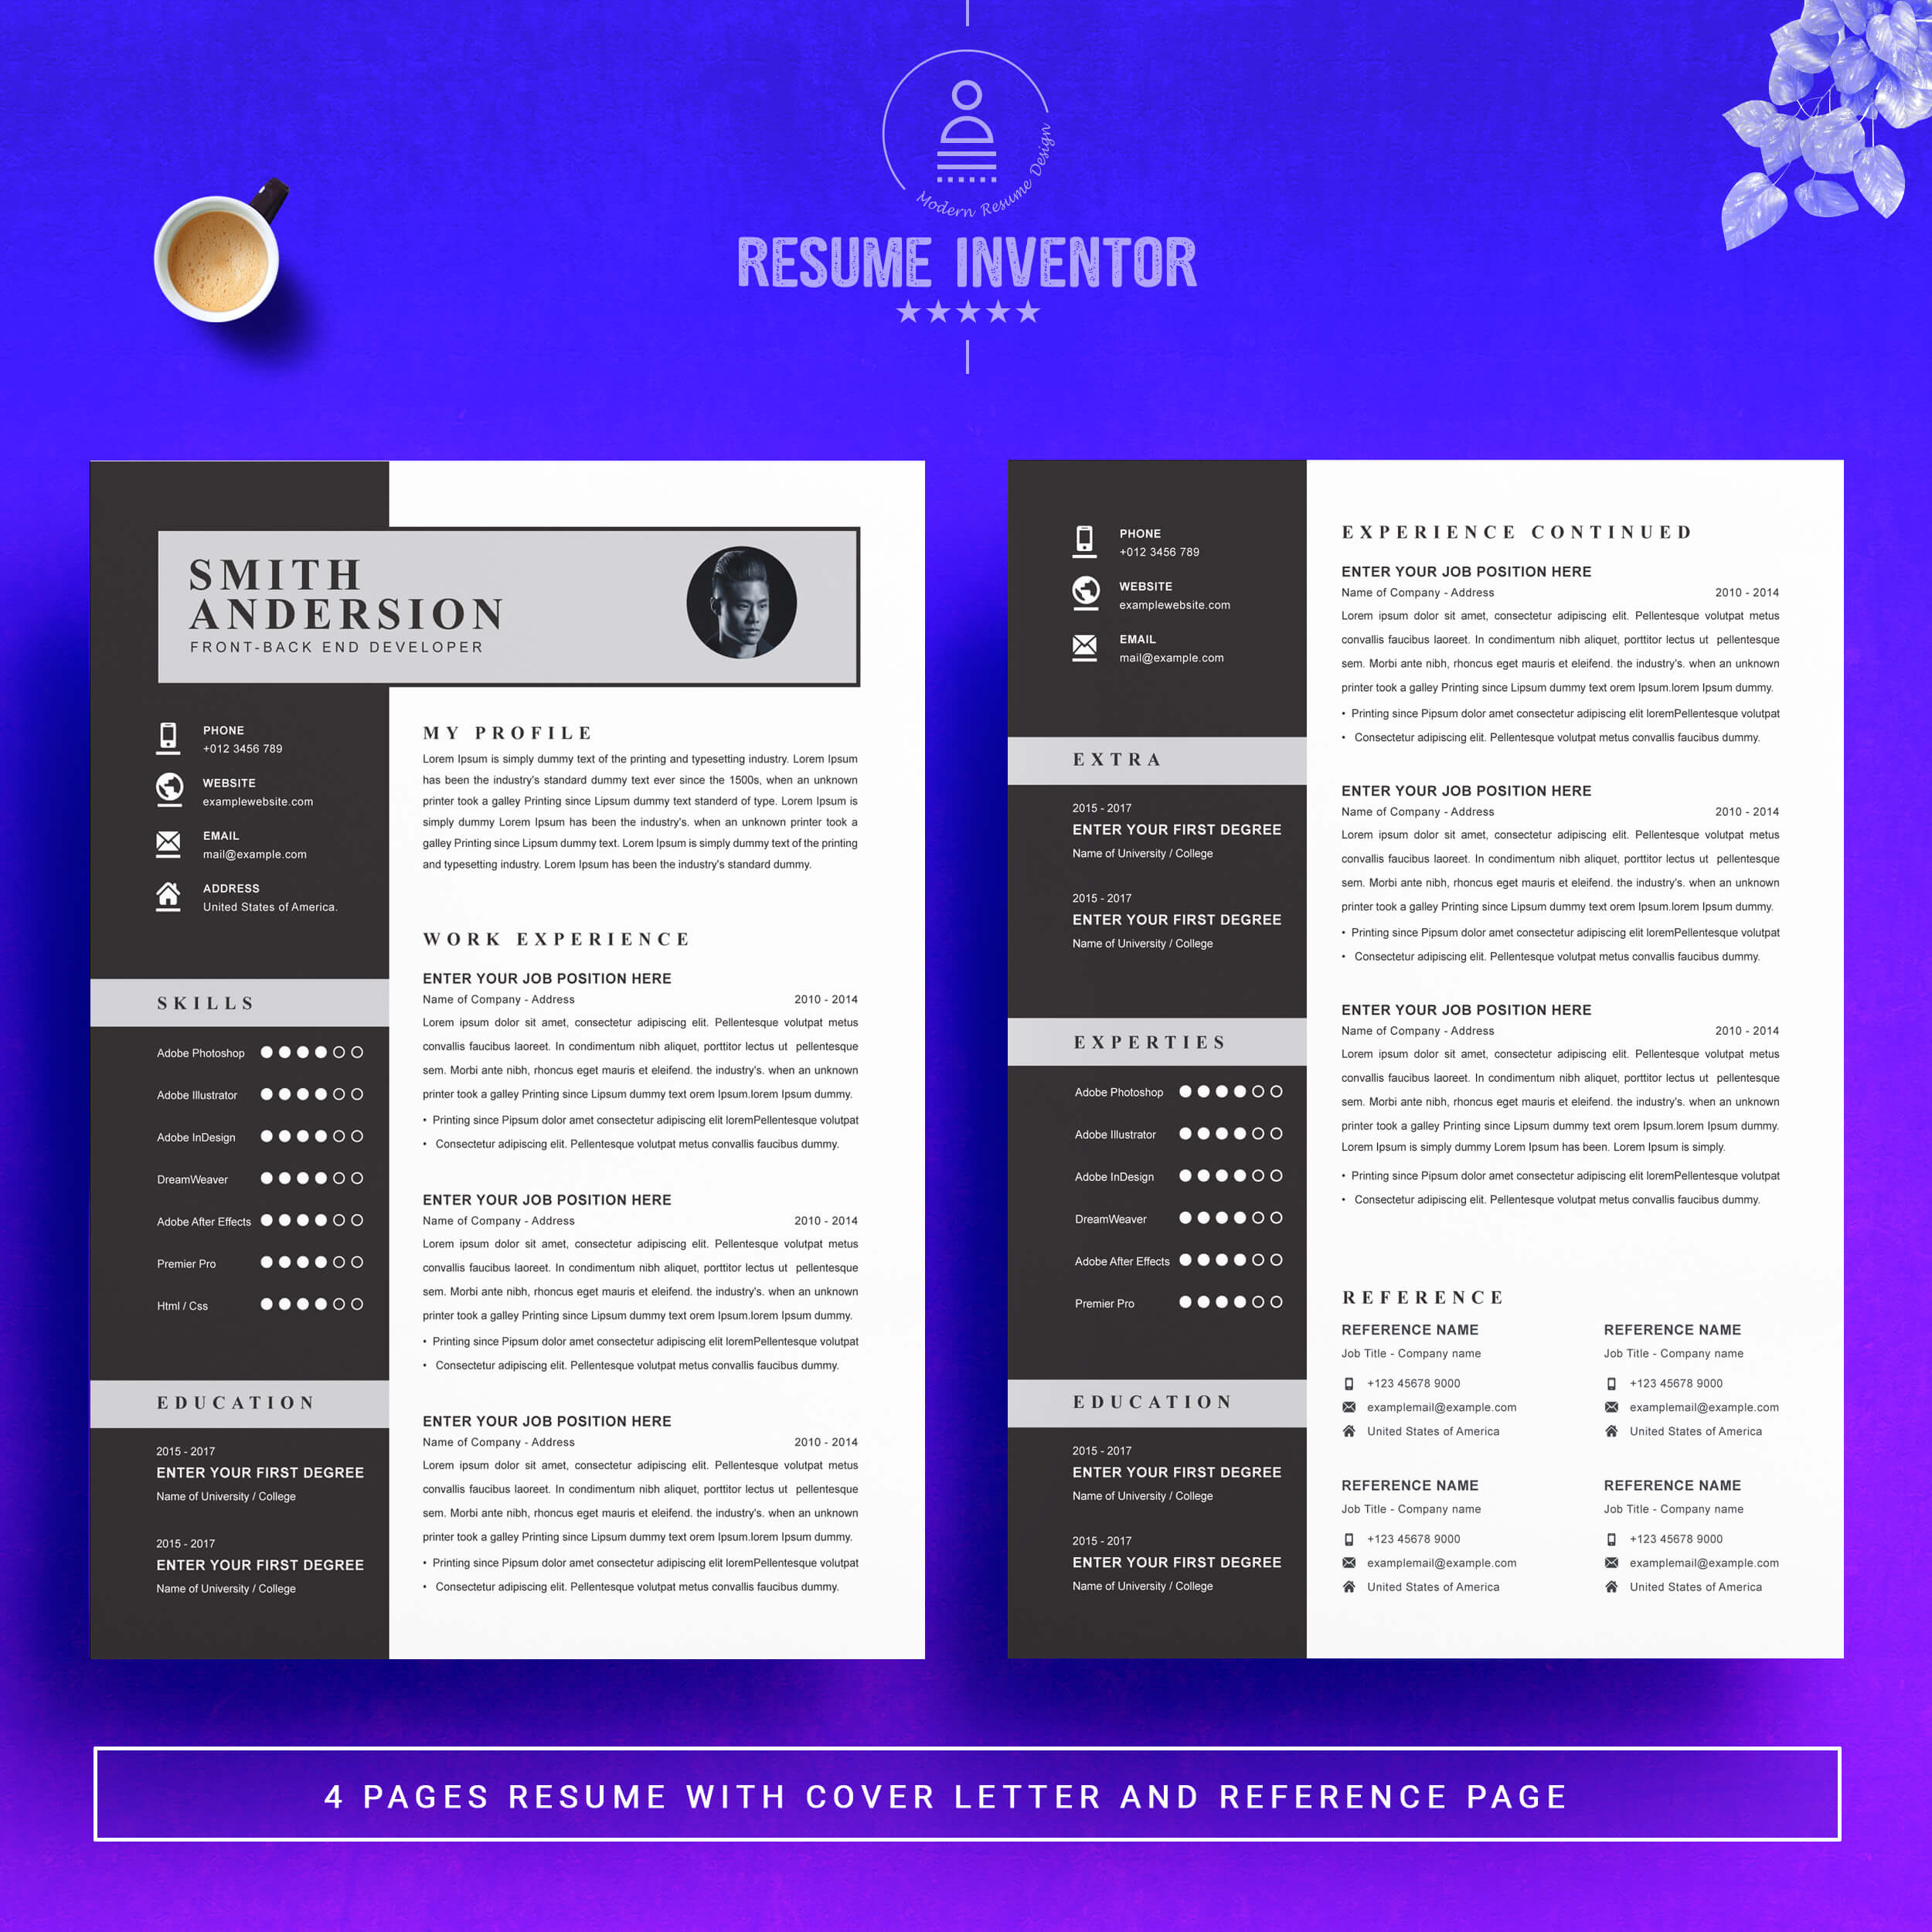 Front - Back End Developer Resume Template | Word Resume Template preview image.